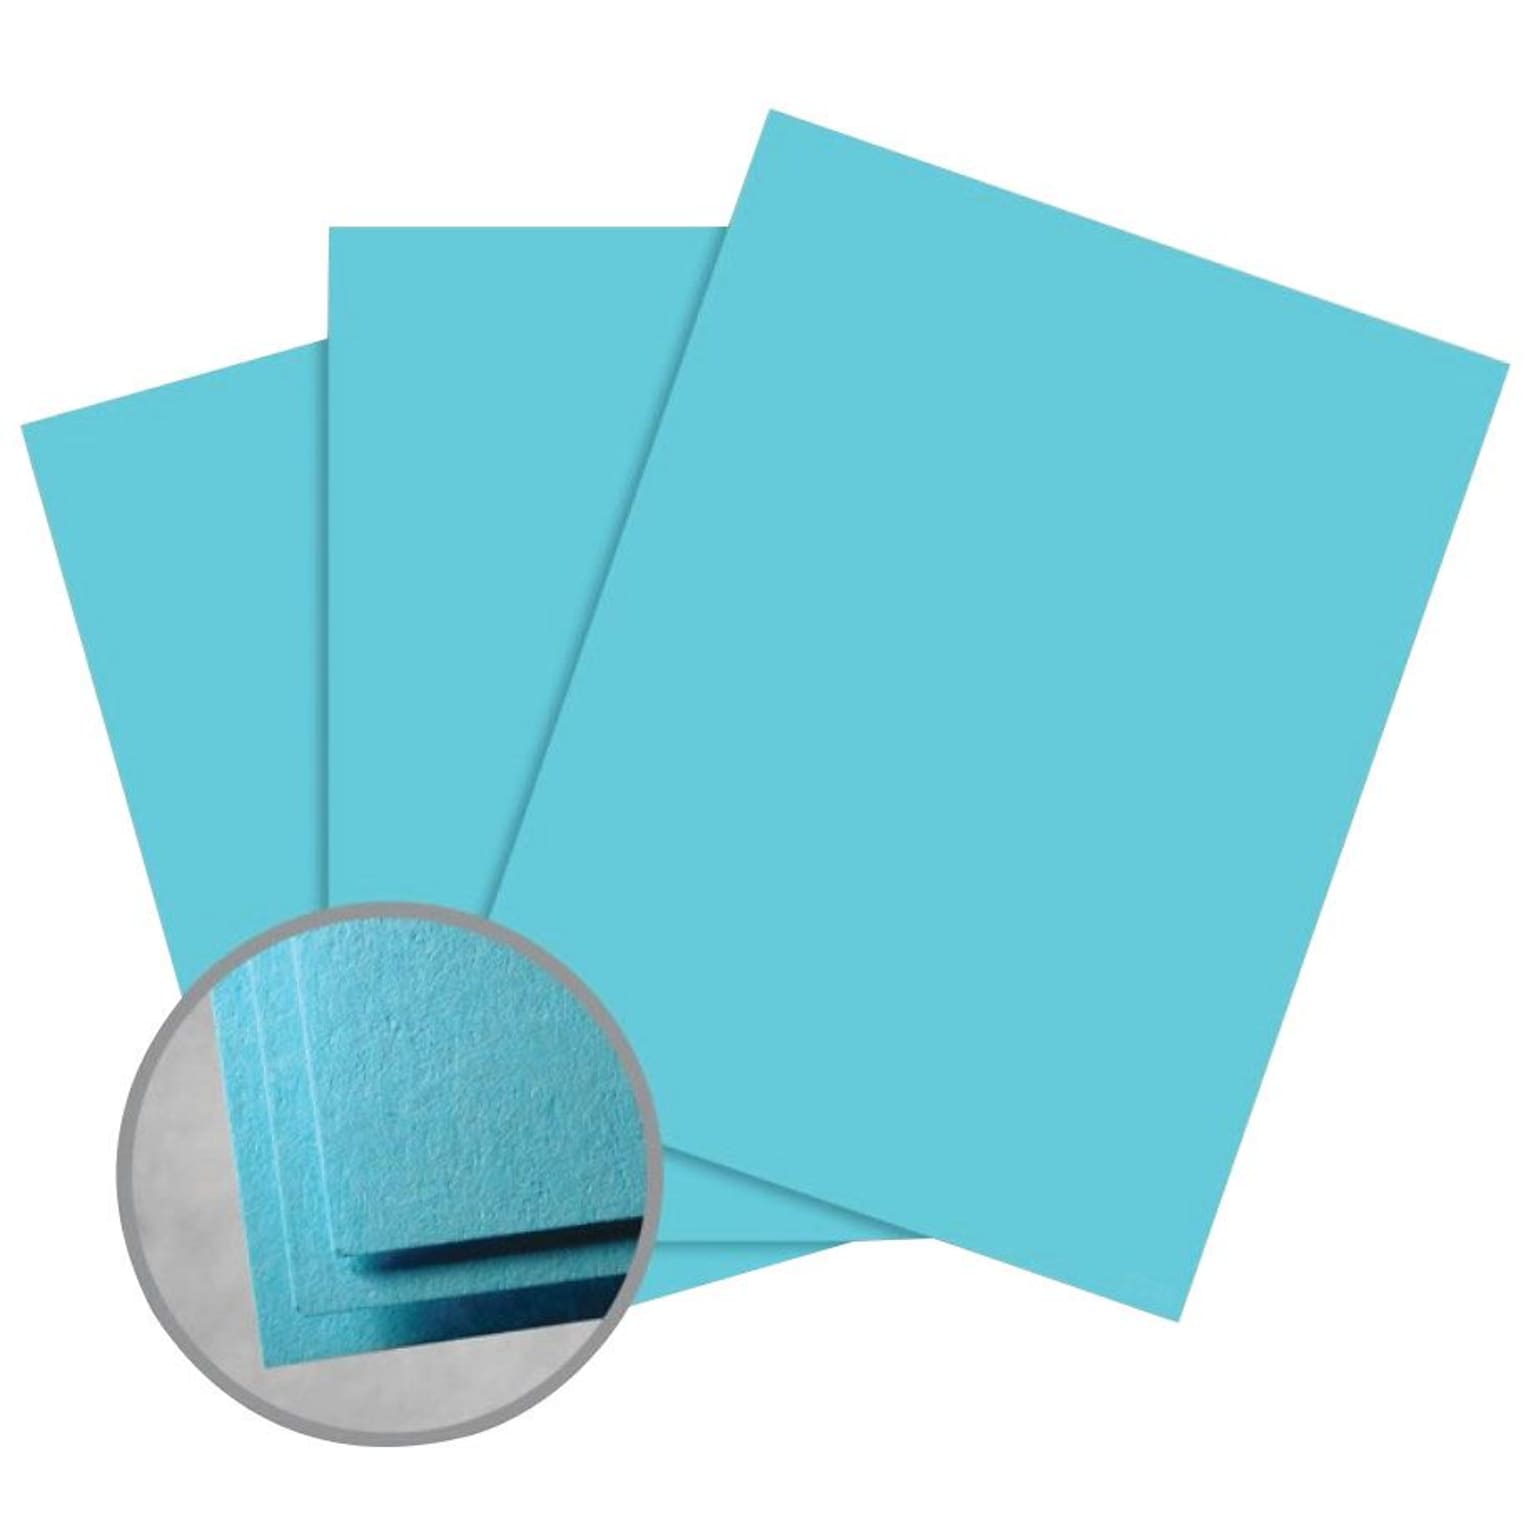 Neenah Astrobrights Smooth Colored Paper, 24 lbs, 8.5 x 11, Lunar Blue, 5000 Sheets/Carton (22521W)